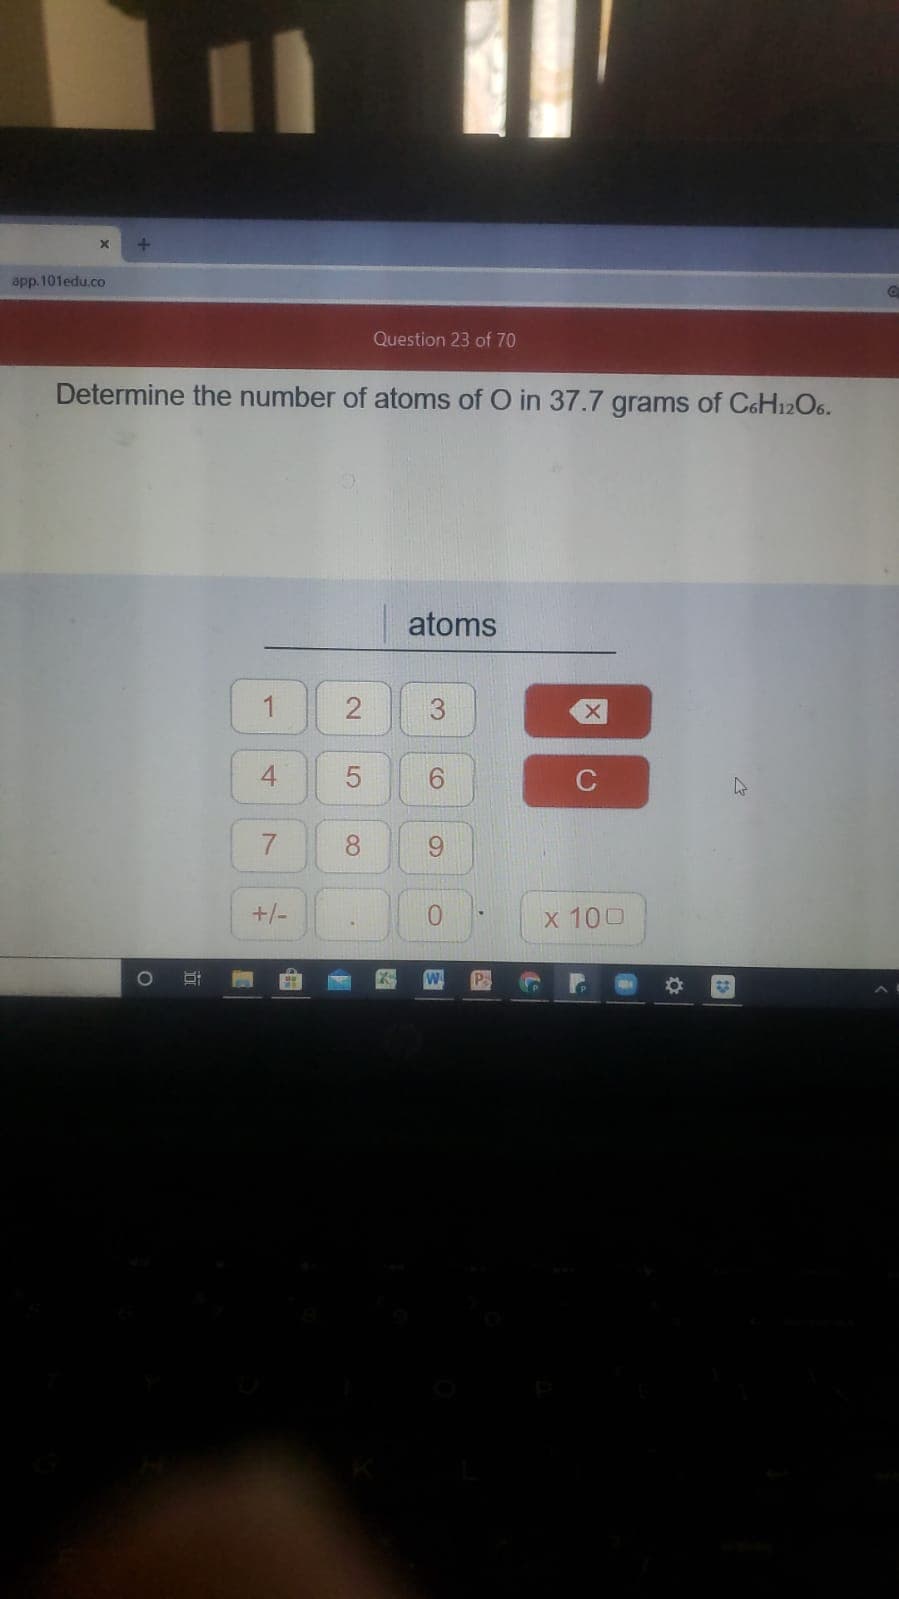 Determine the number of atoms of O in 37.7 grams of C6H12O6.
